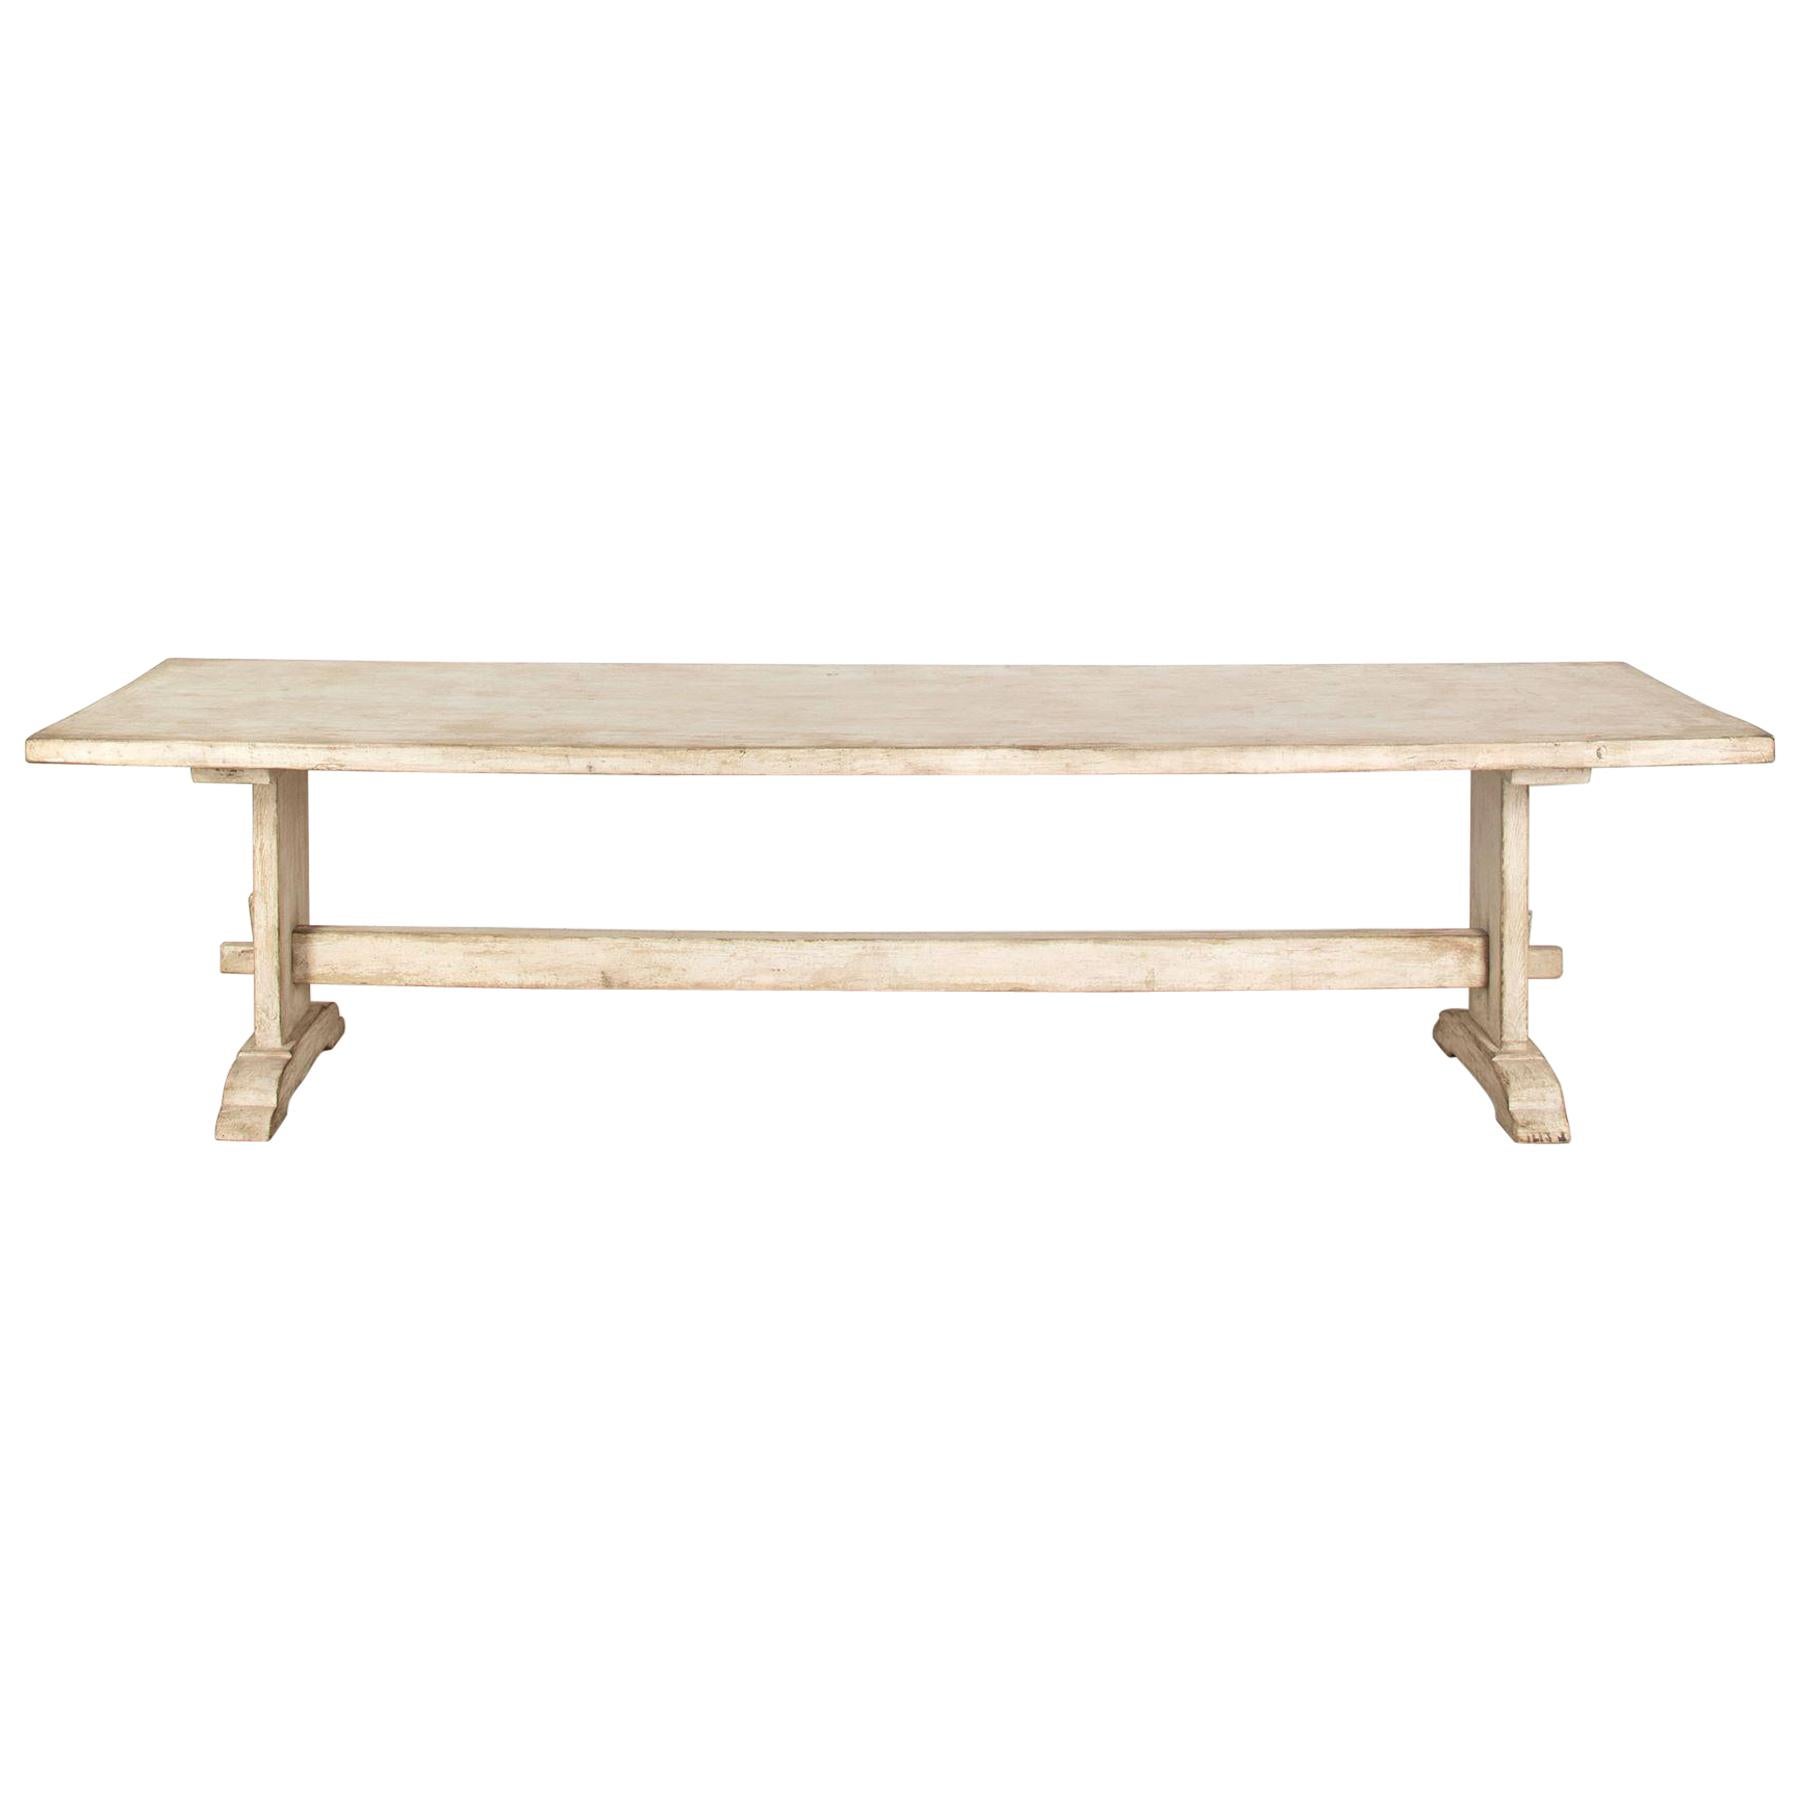 Large Italian Refectory Table